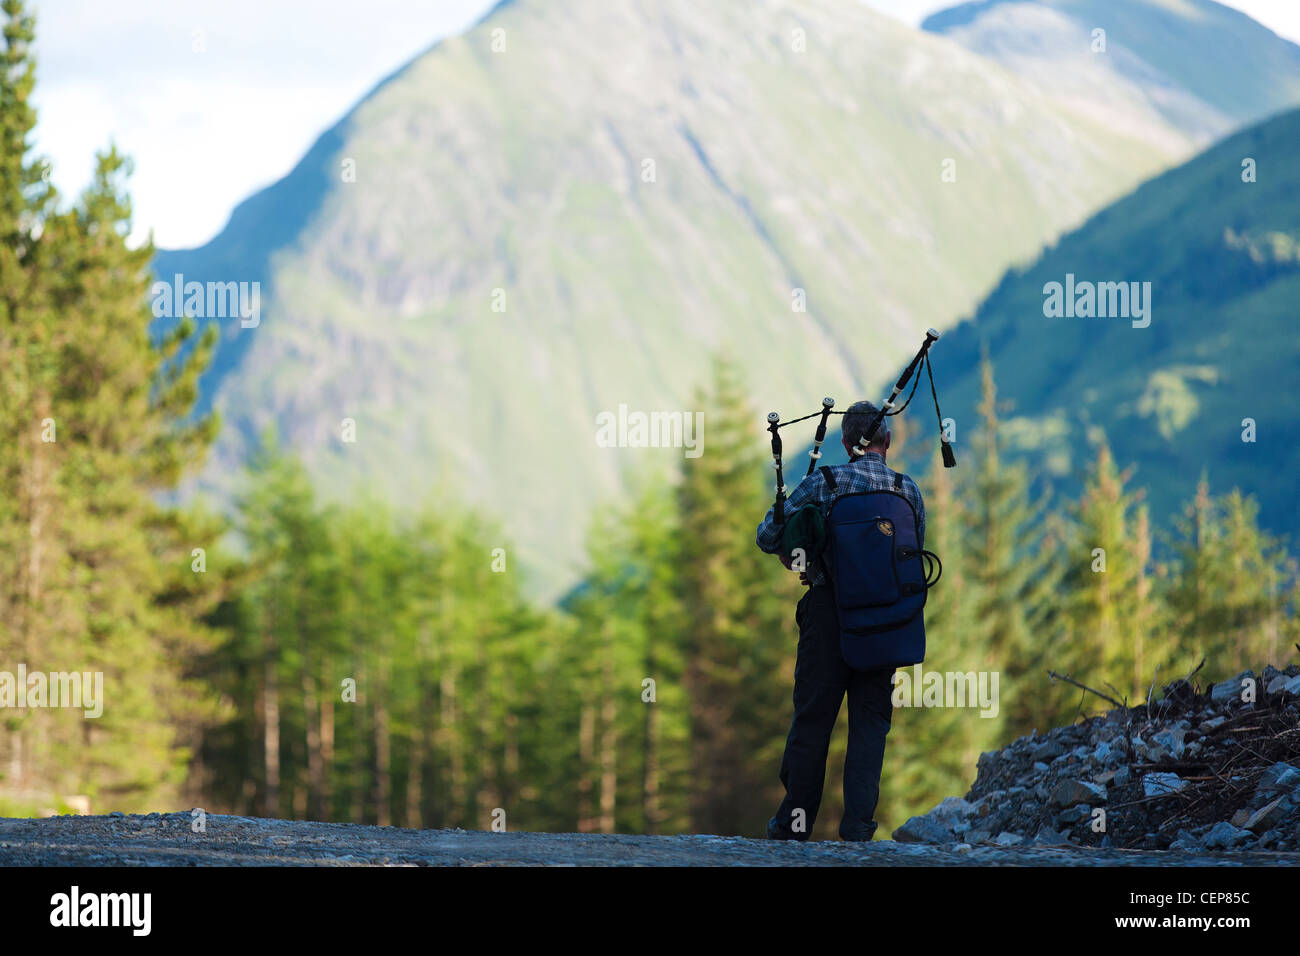 A man practices with his bagpipes in Glencoe in the Scottish highlands, an area of extreme natural beauty and important history. Stock Photo